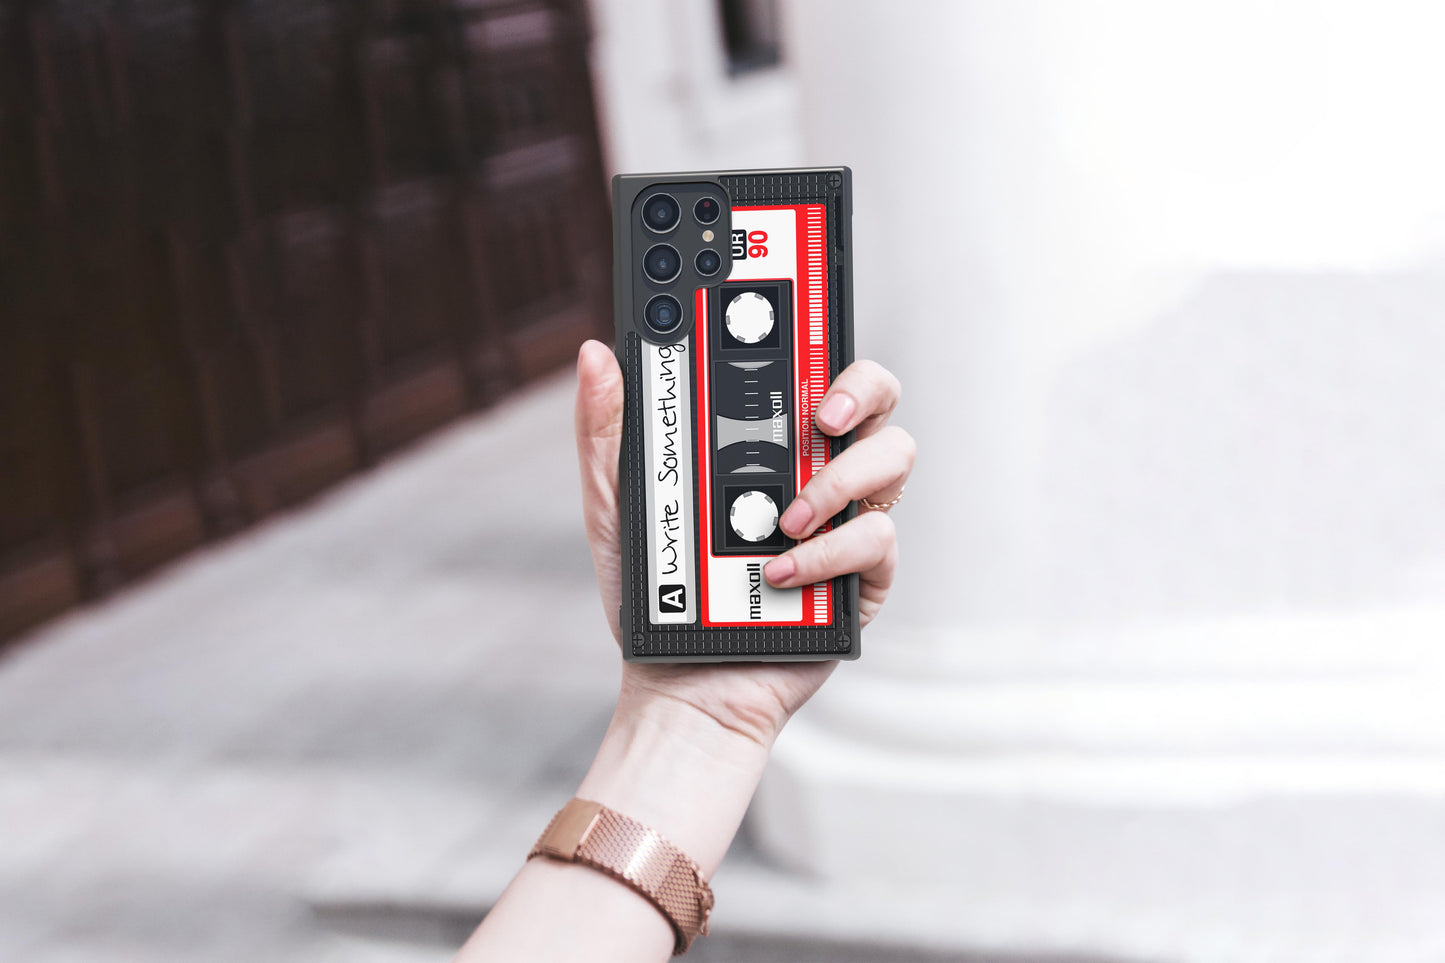 Cassette Tape Black and Red Personalized | Samsung Phone Case